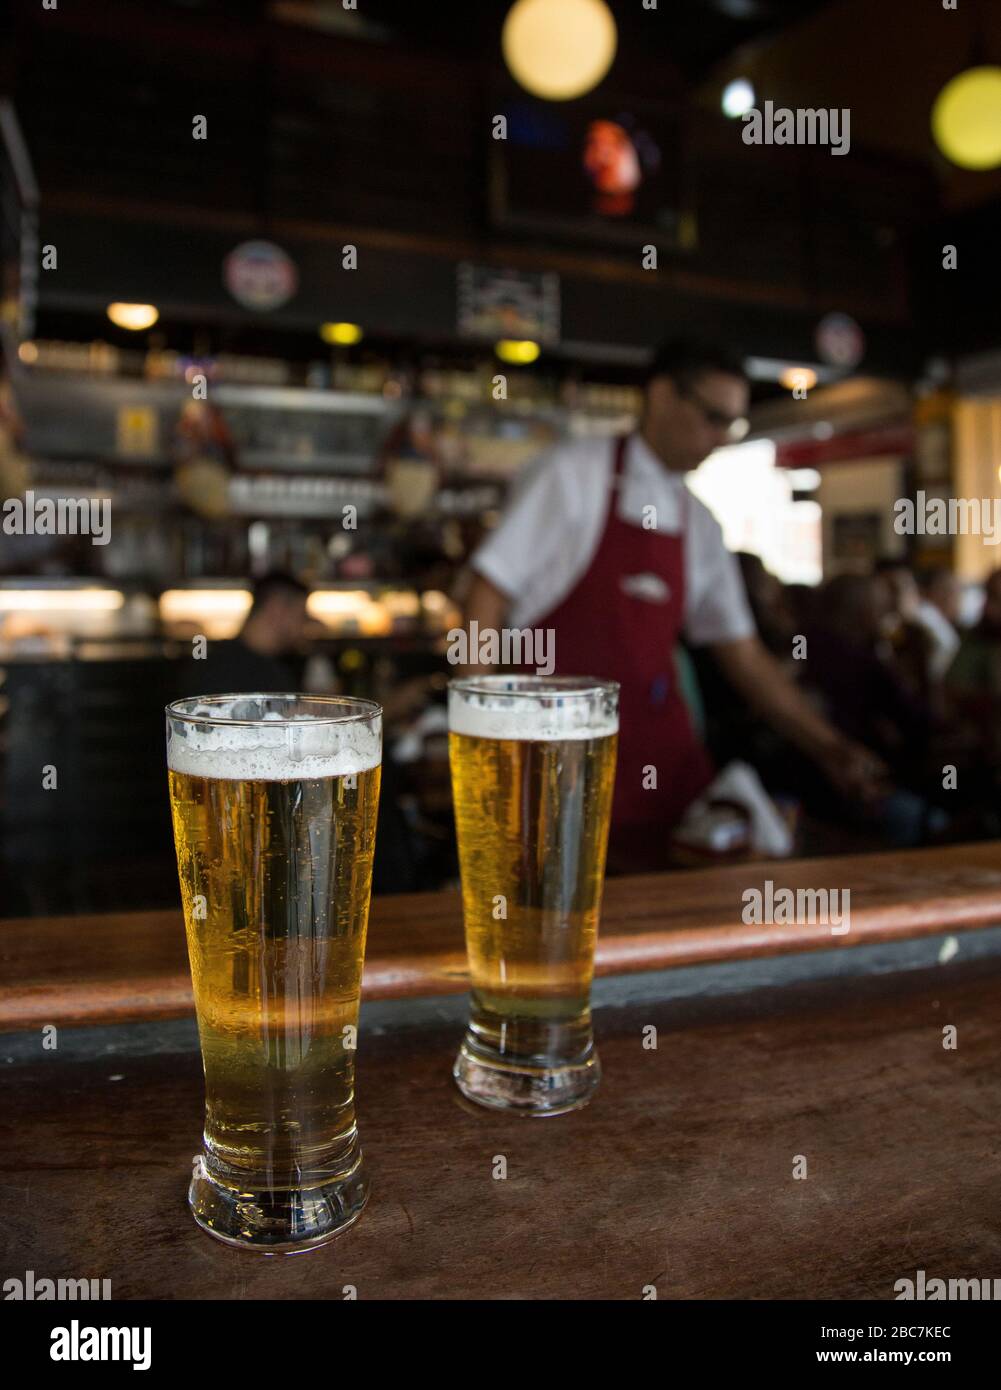 Small beers on the bar with a bar tender and people in the background Stock Photo